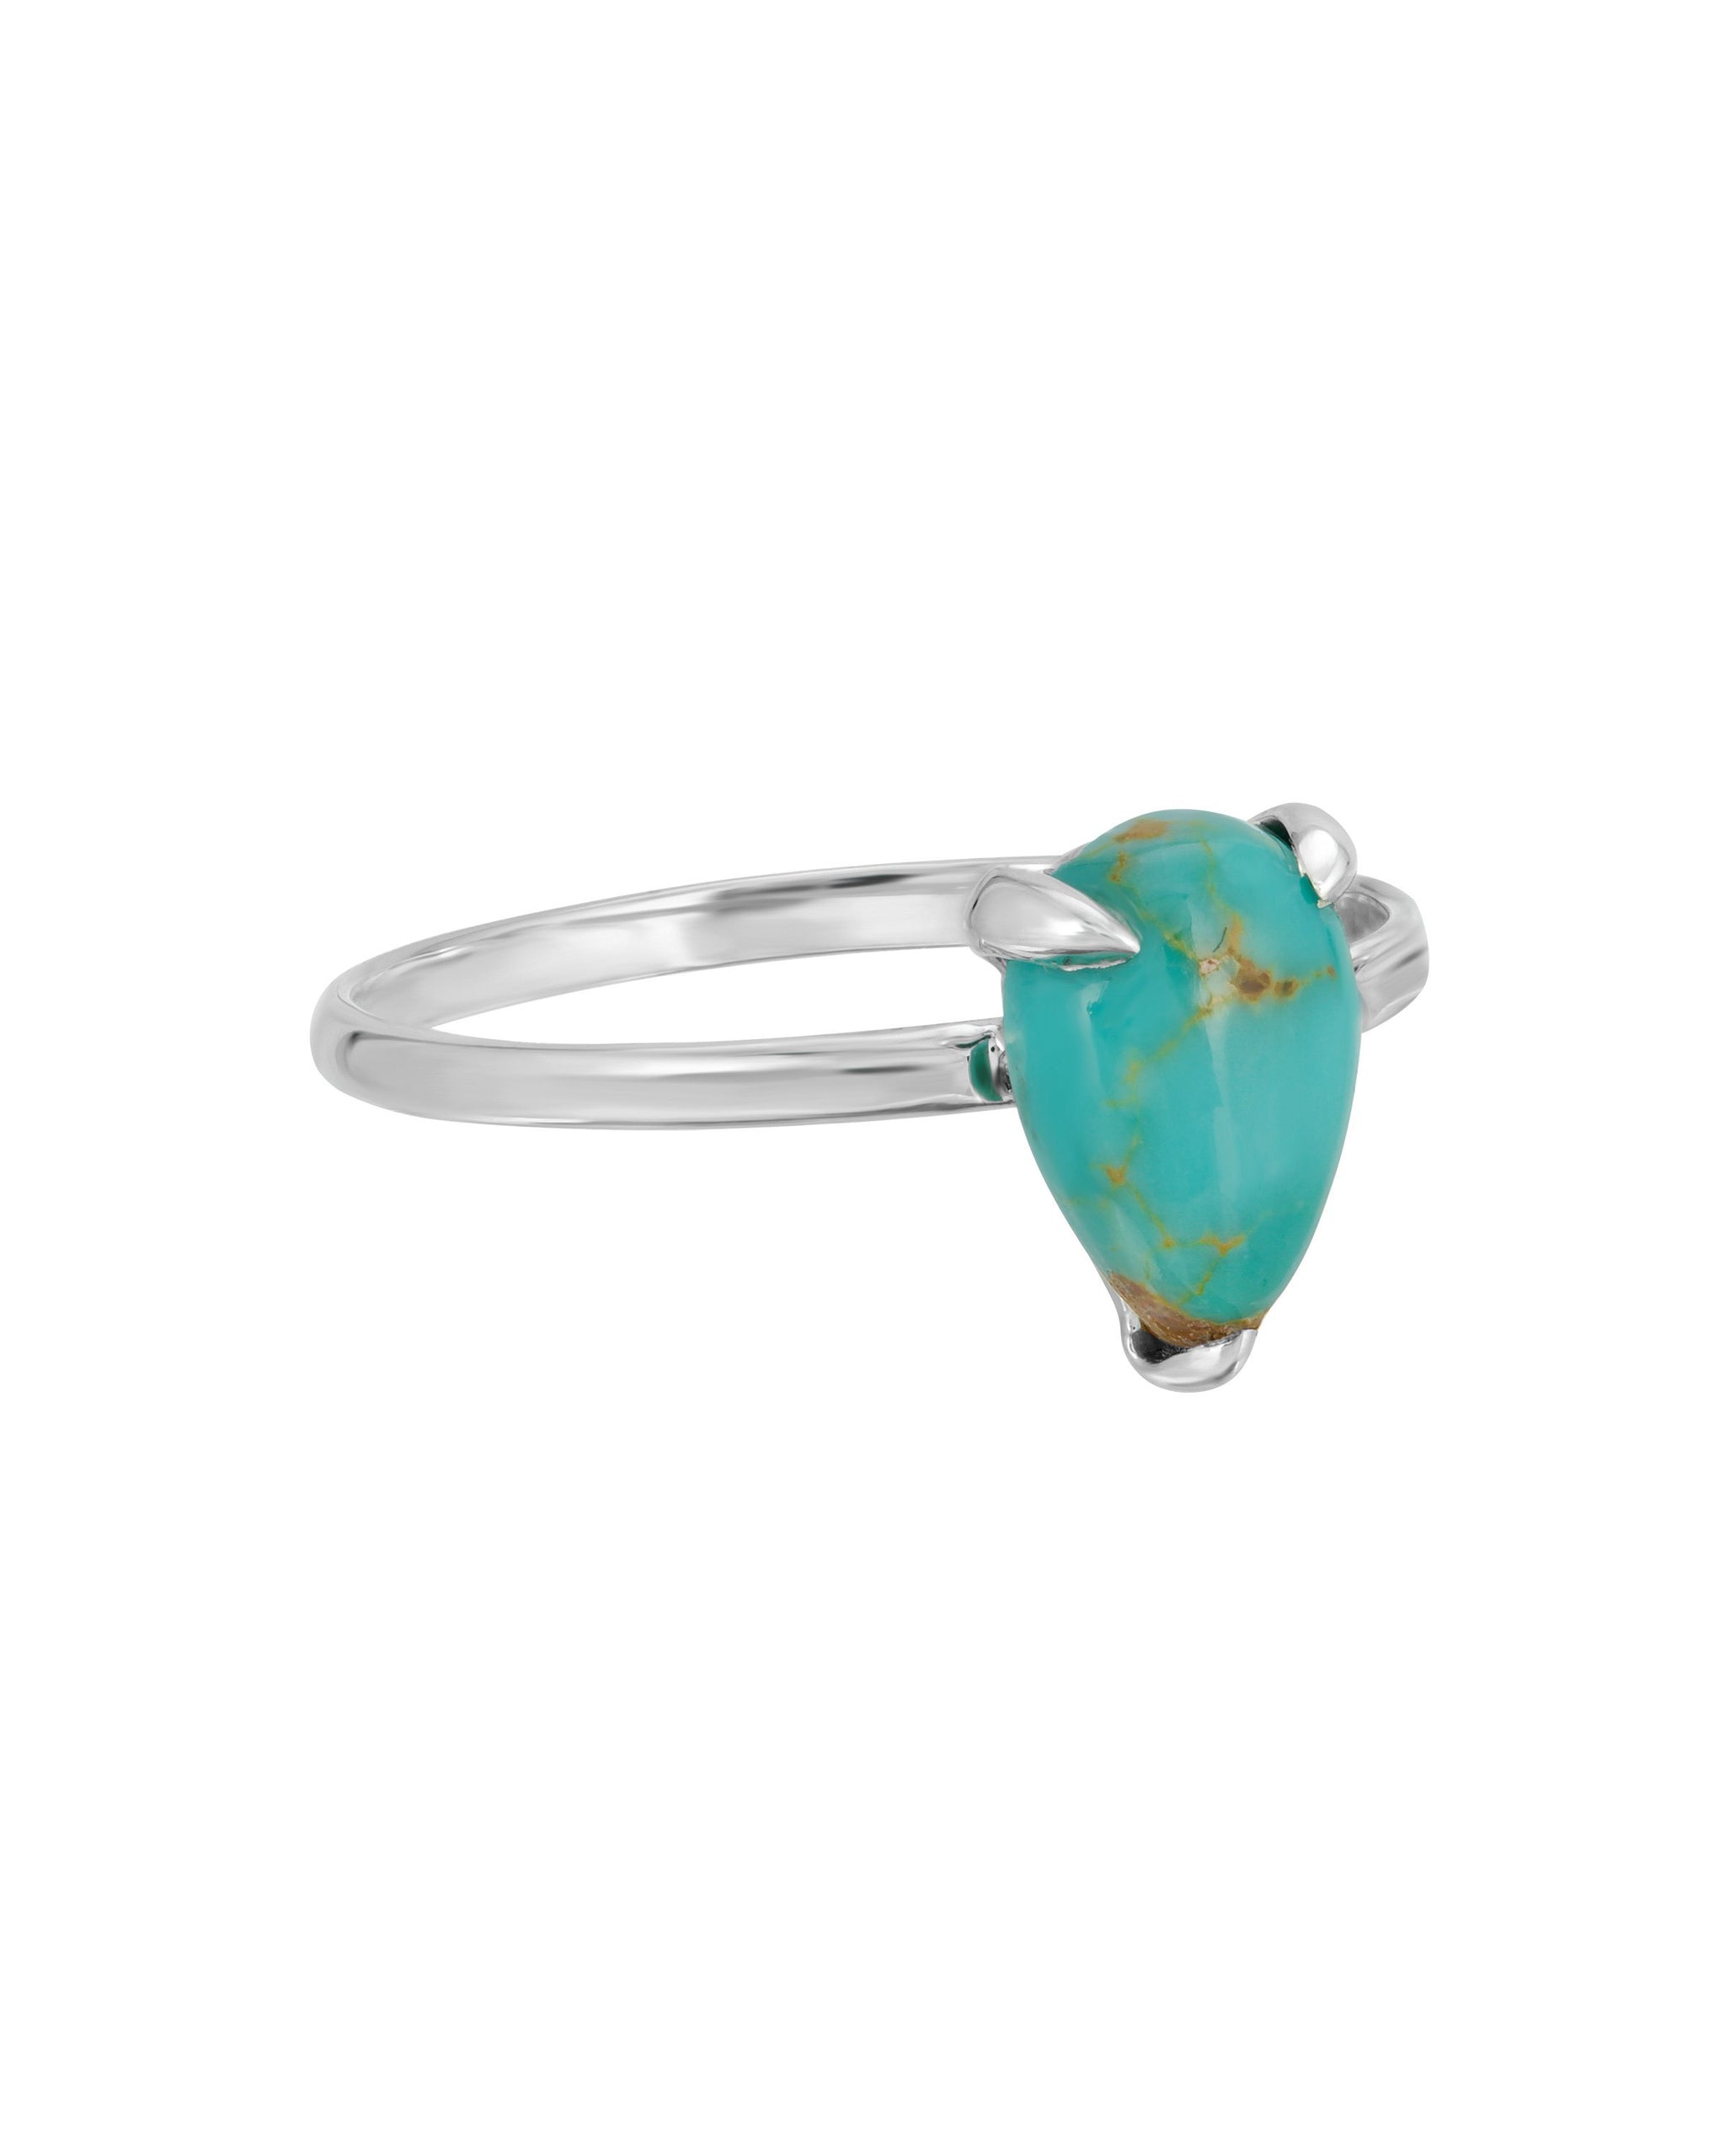 Halcyon Ring, Sterling silver pear shape ring with claw prongs and kingman turquoise pear shape stone